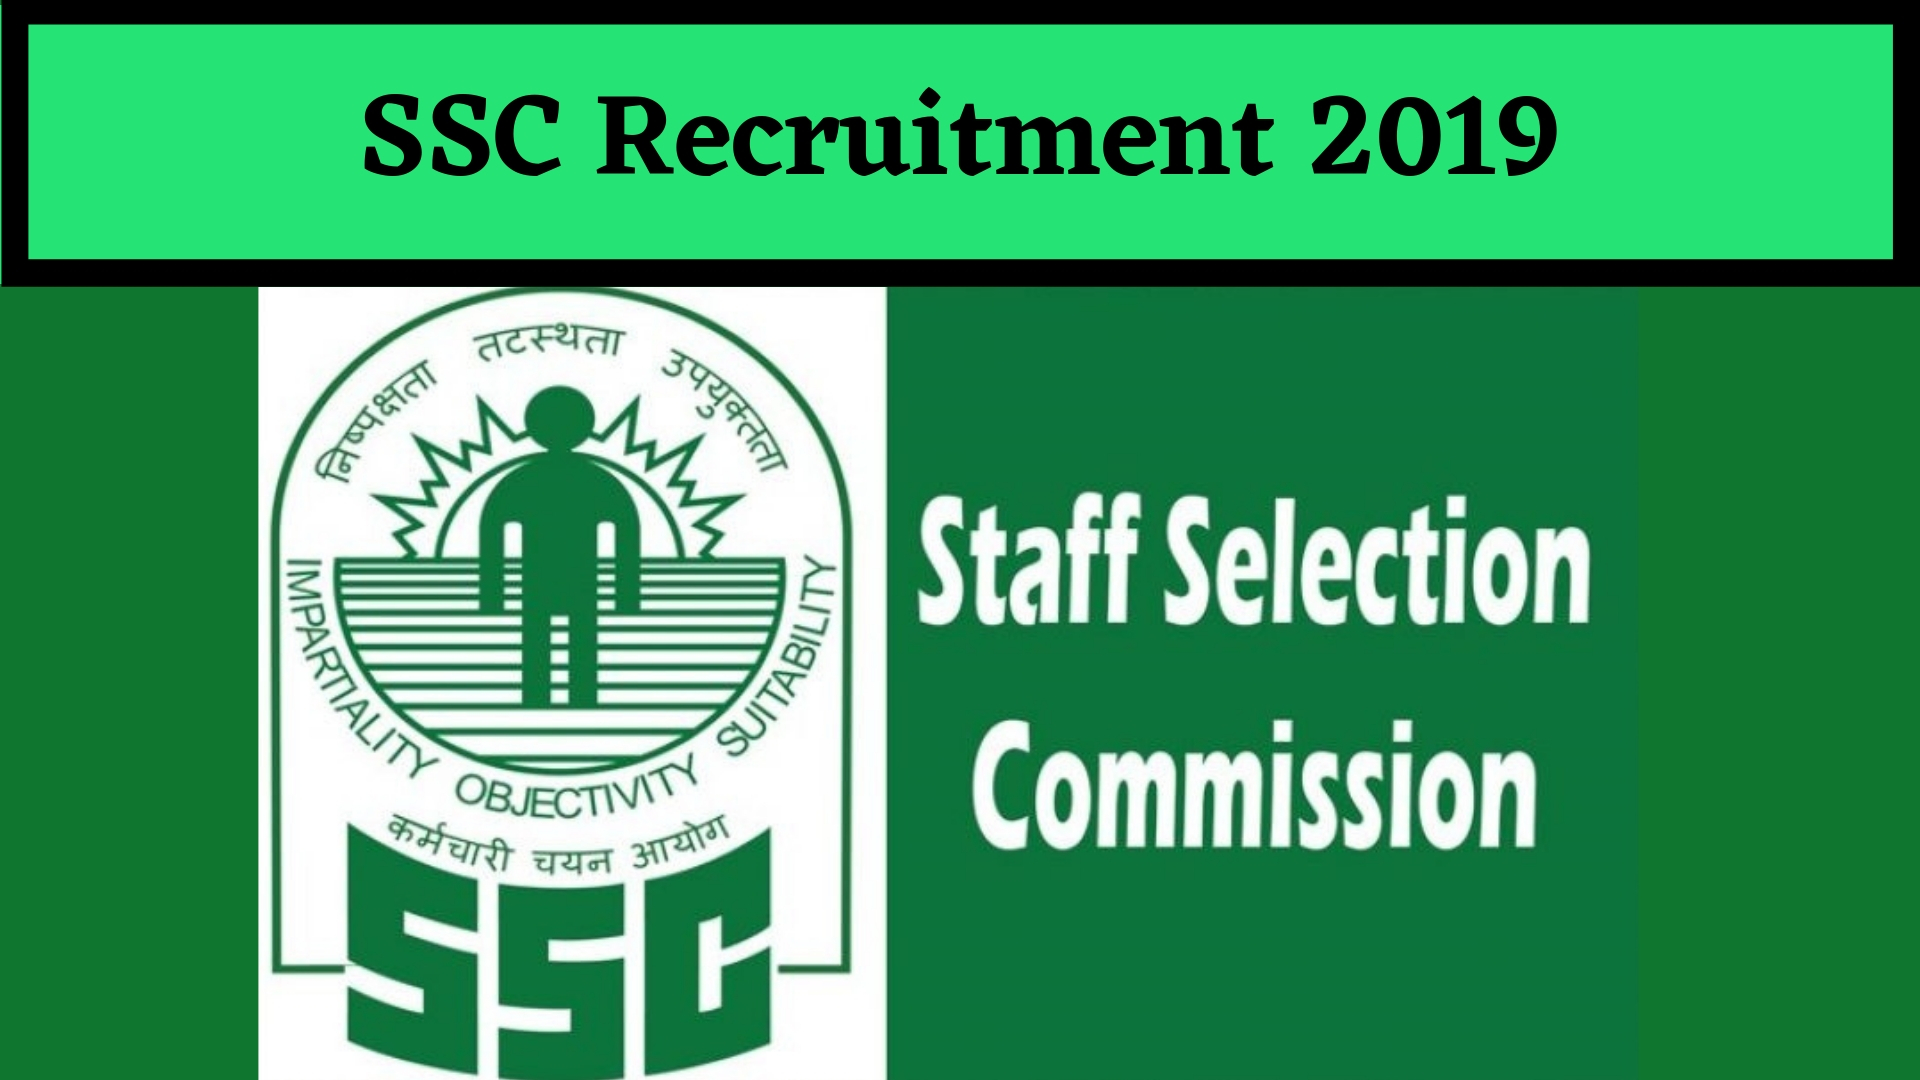 ssc-recruitment-2019-bumper-recruitment-for-1724-posts-for-graduation-from-10th-pass